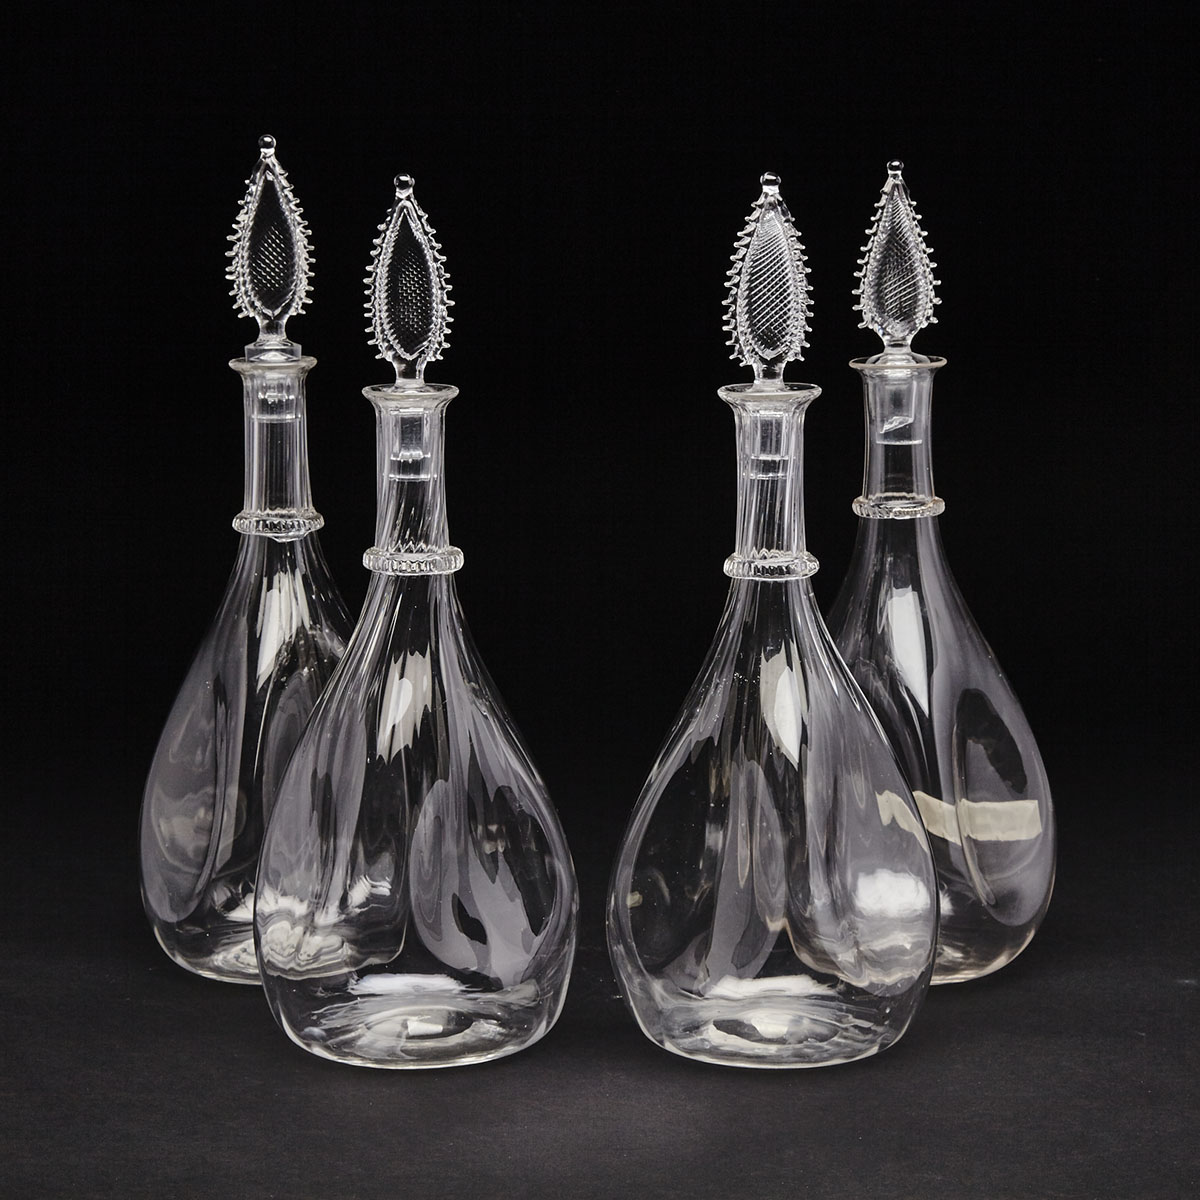 Set of Four Whitefriars Glass Decanters, James Powell & Sons, late 19th century